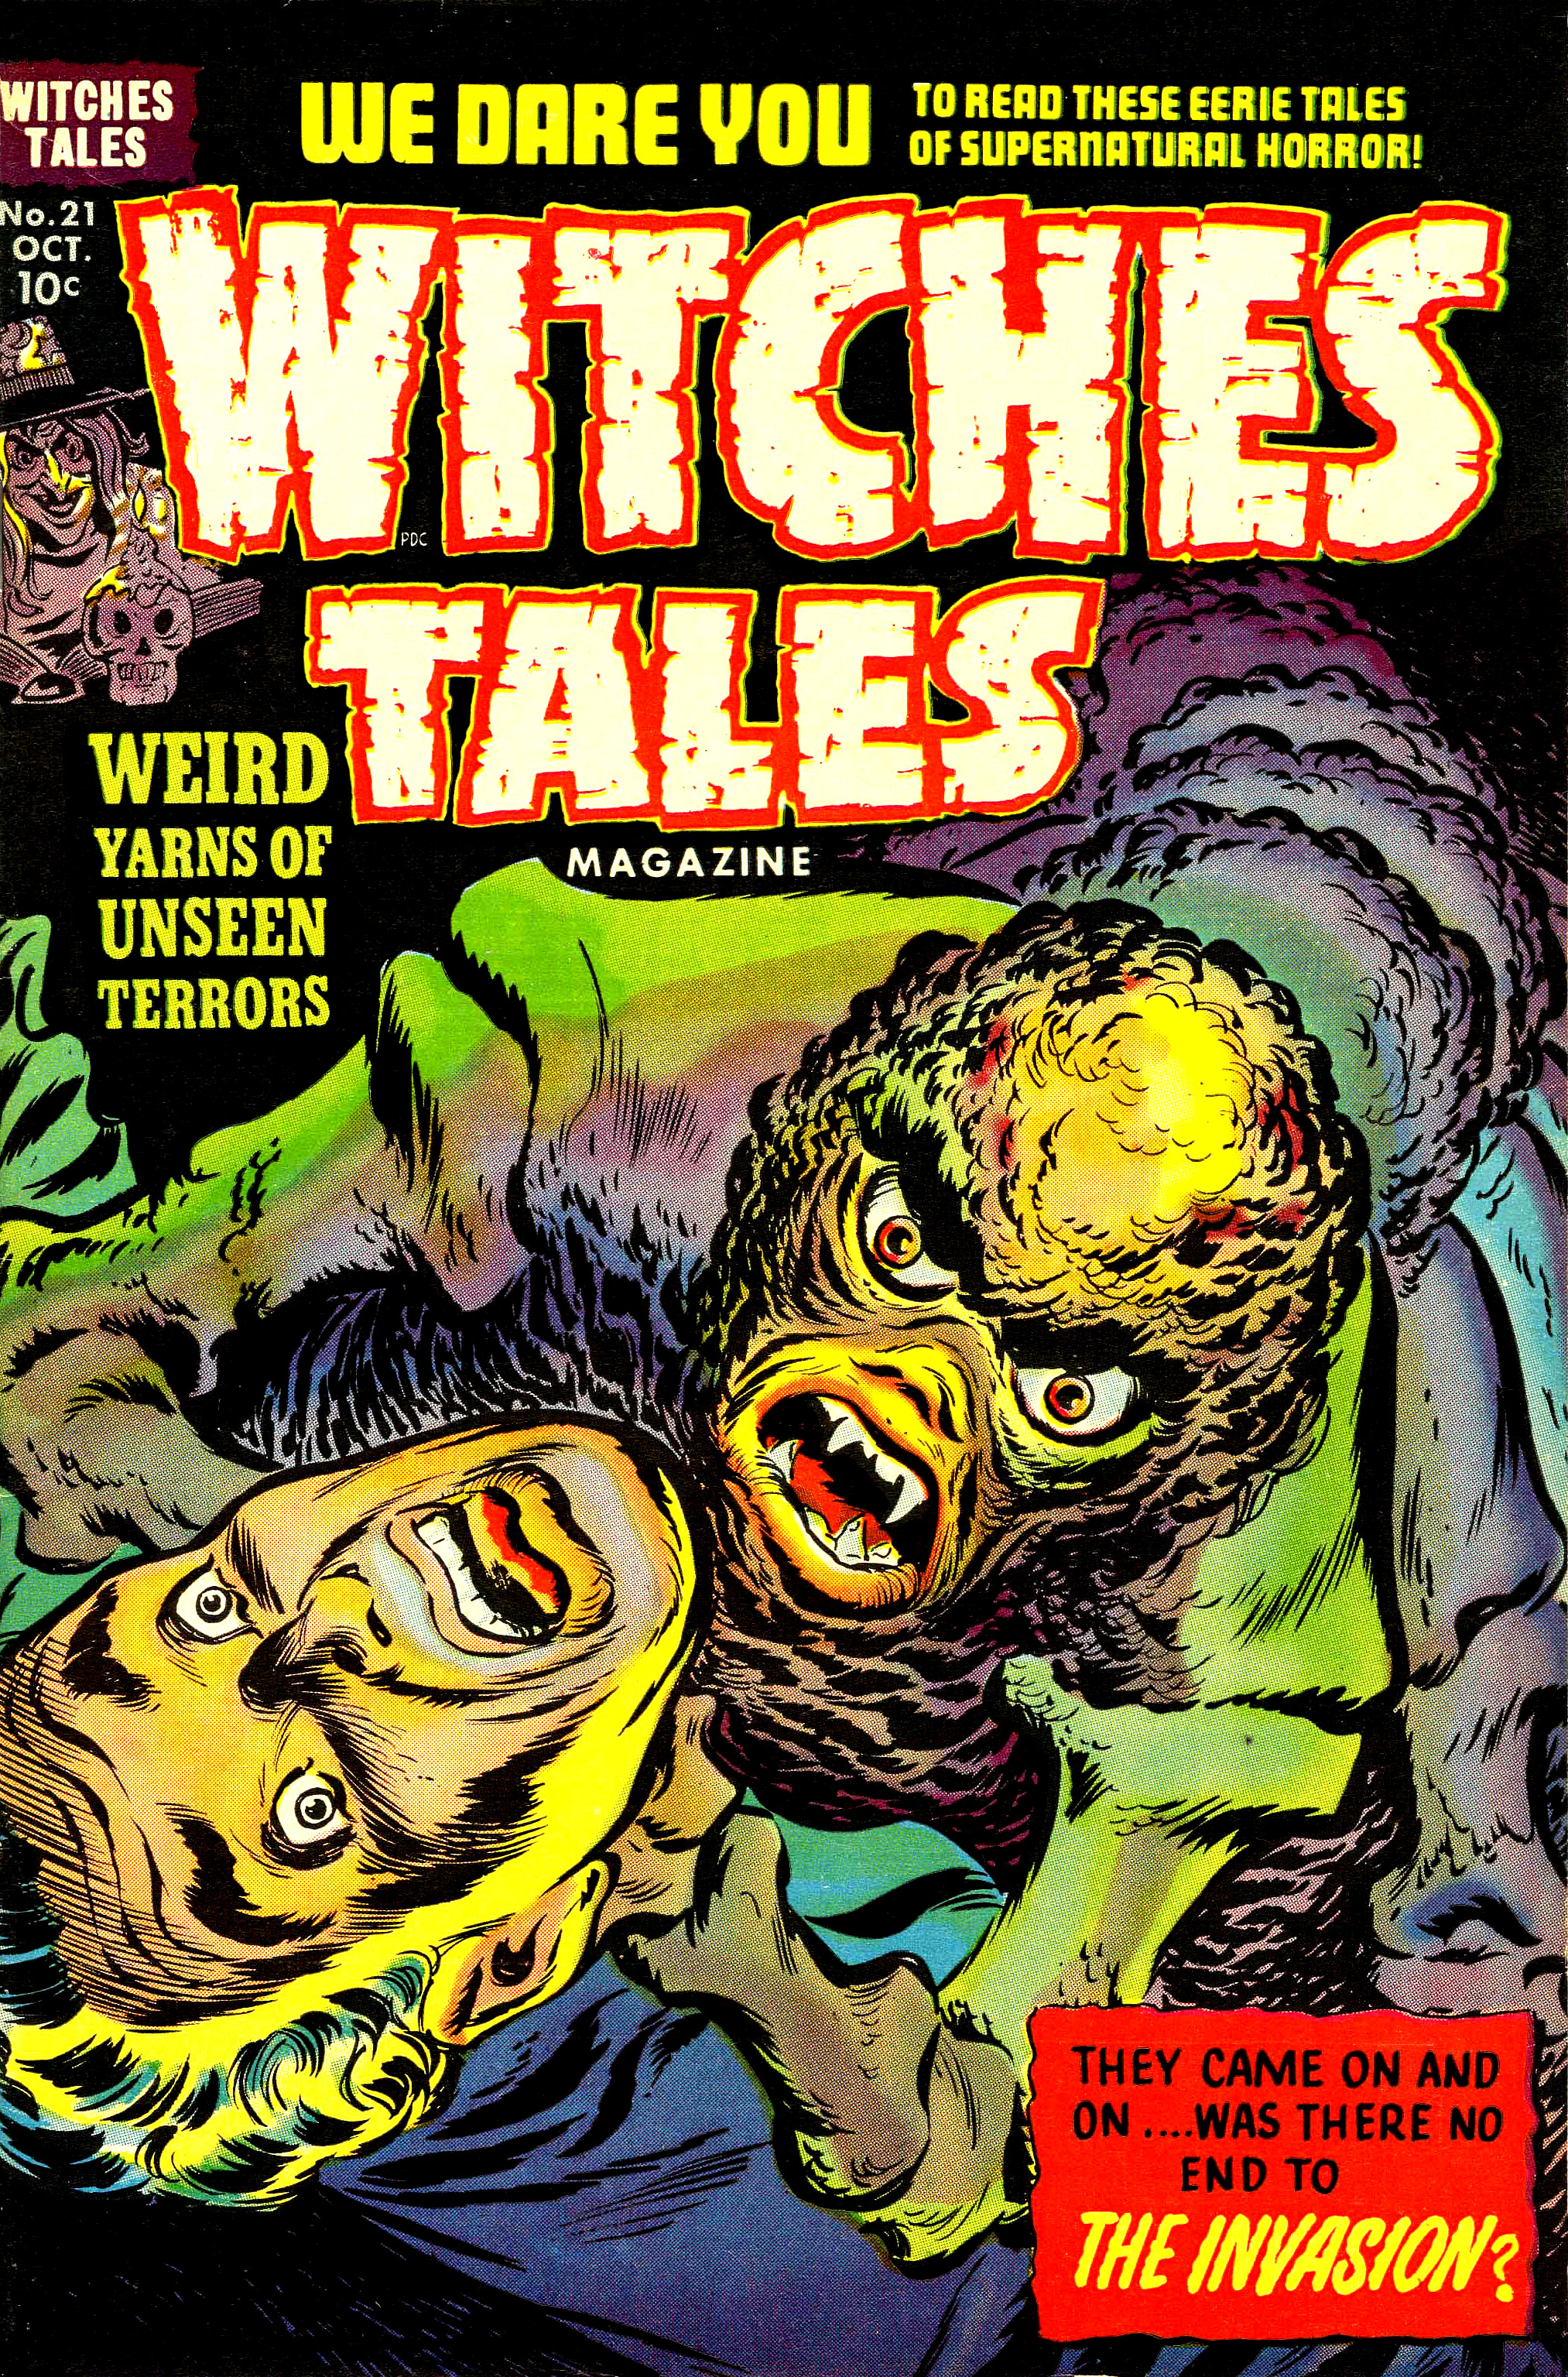 Witches Tales #21, Warren Kremer, Lee Elias Cover (Harvey, 1953)